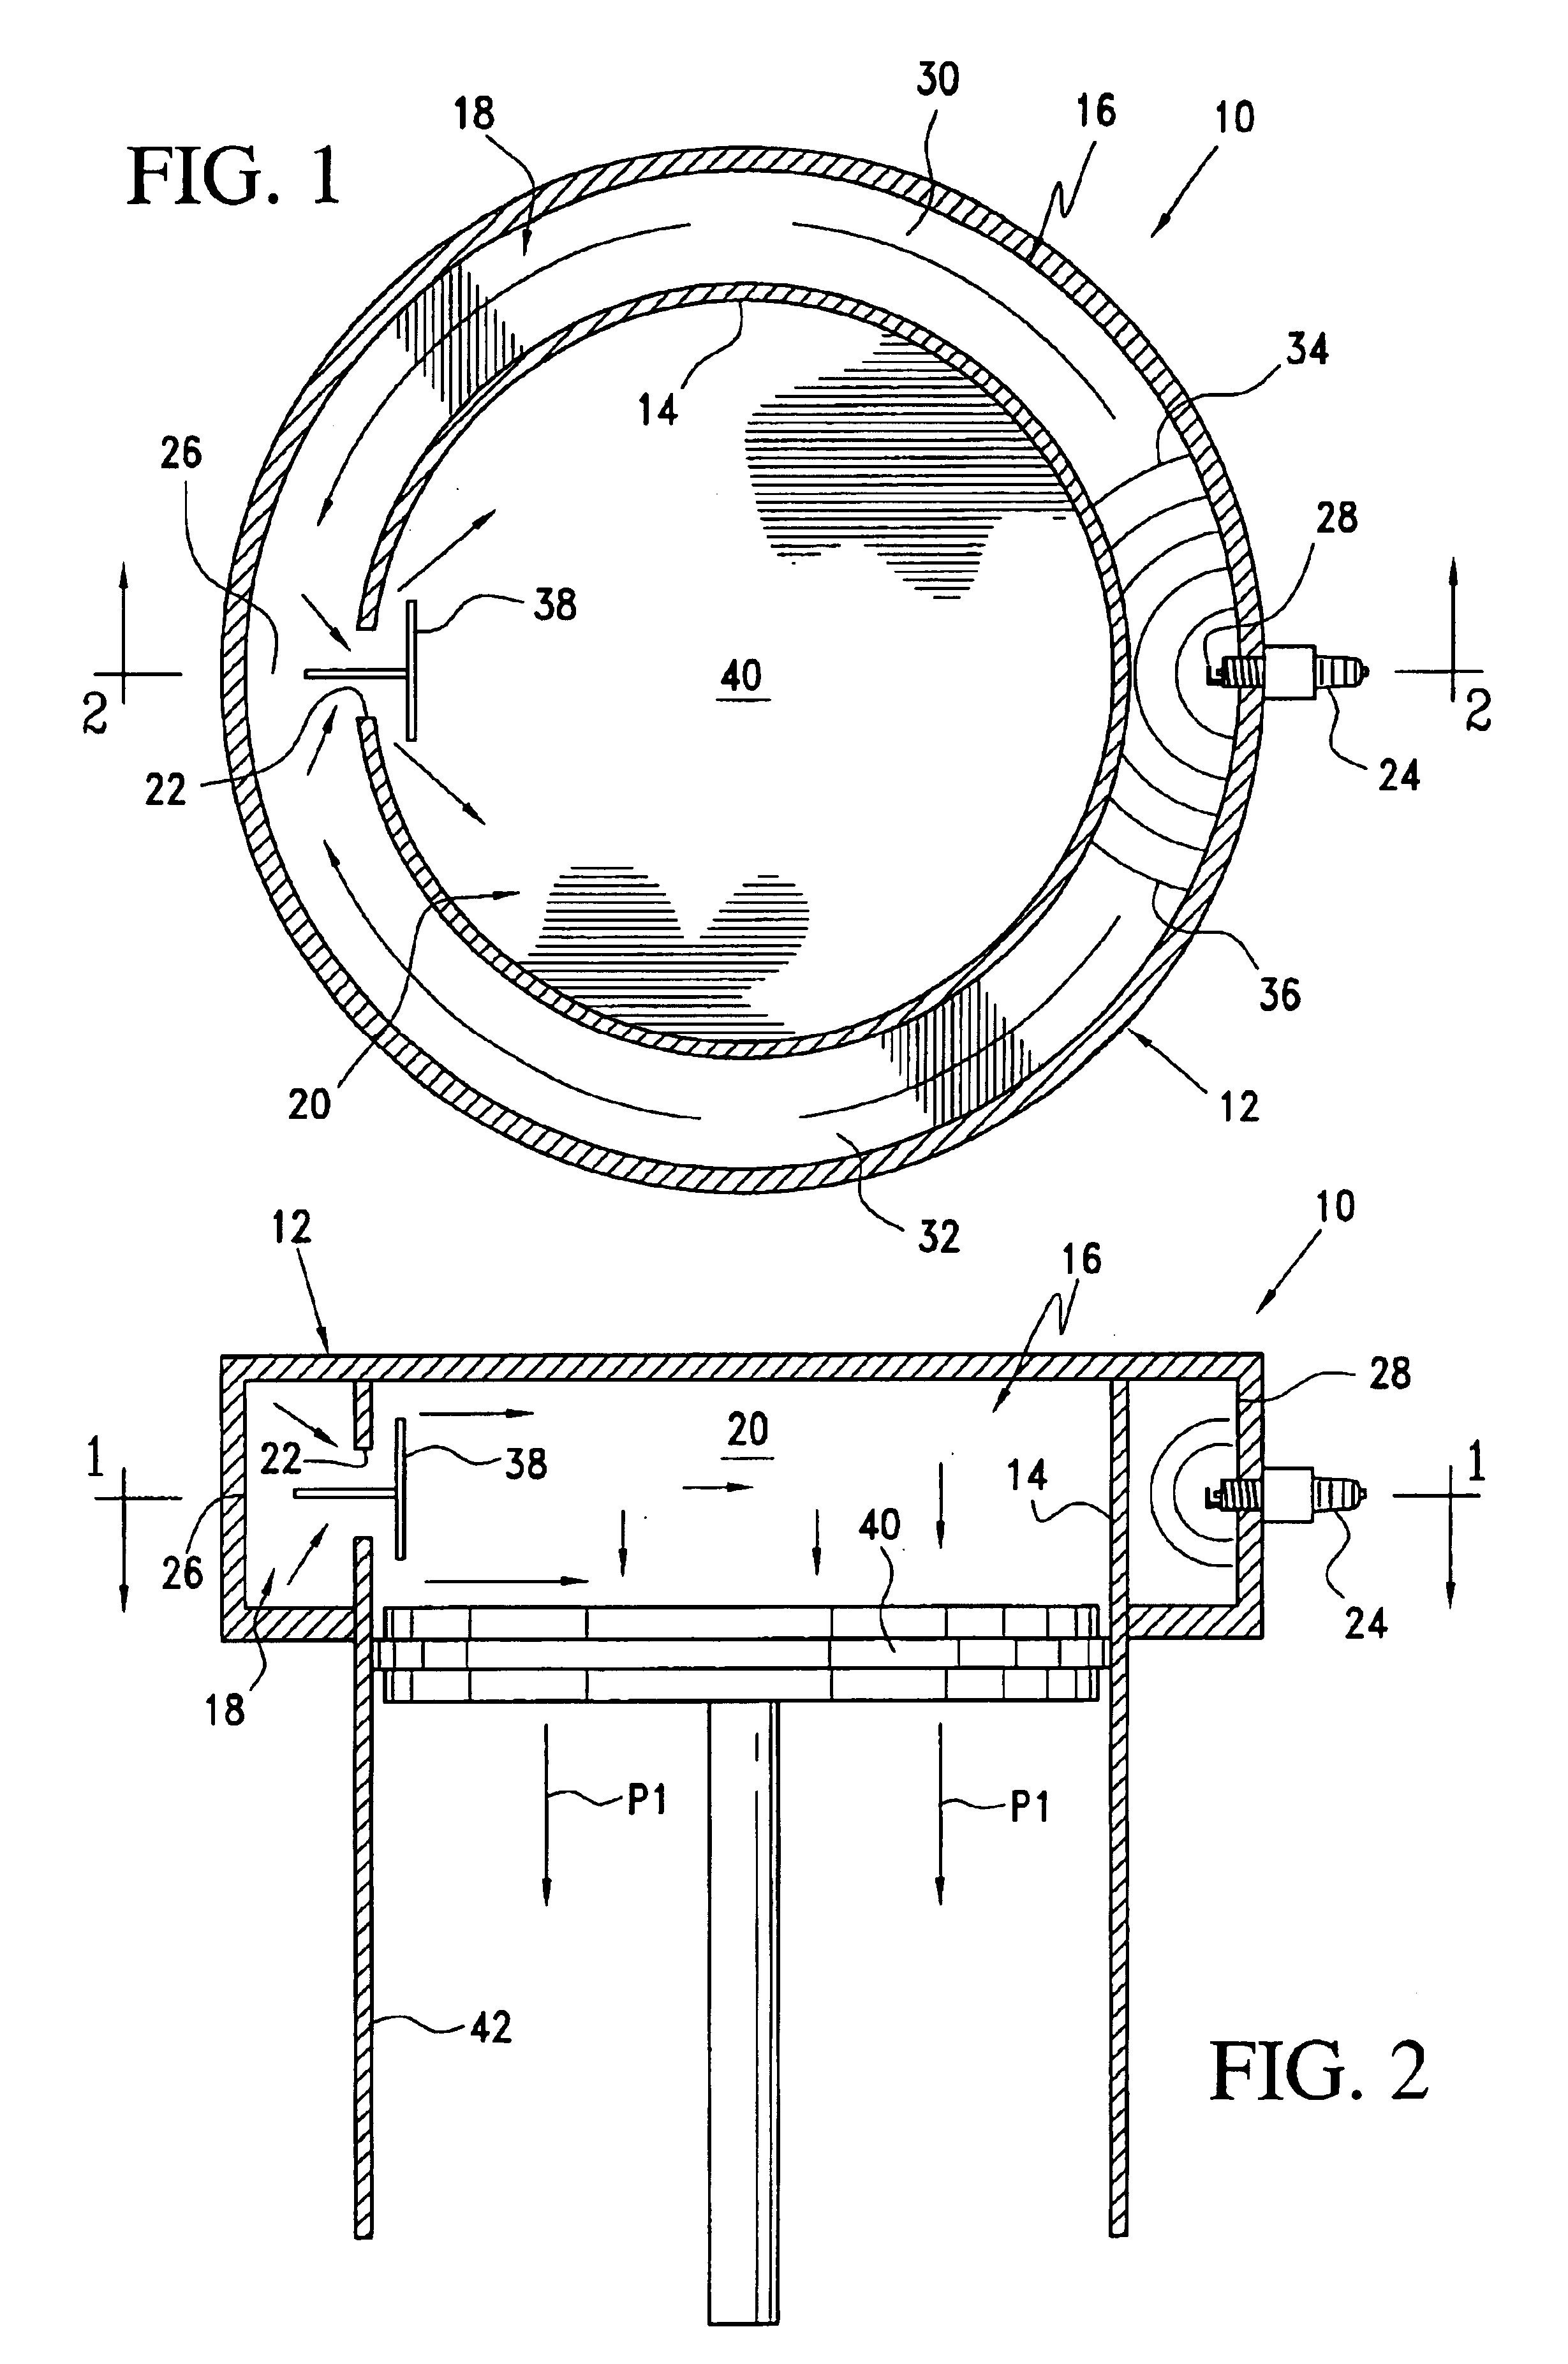 Multiple-front combustion chamber system with a fuel/air management system